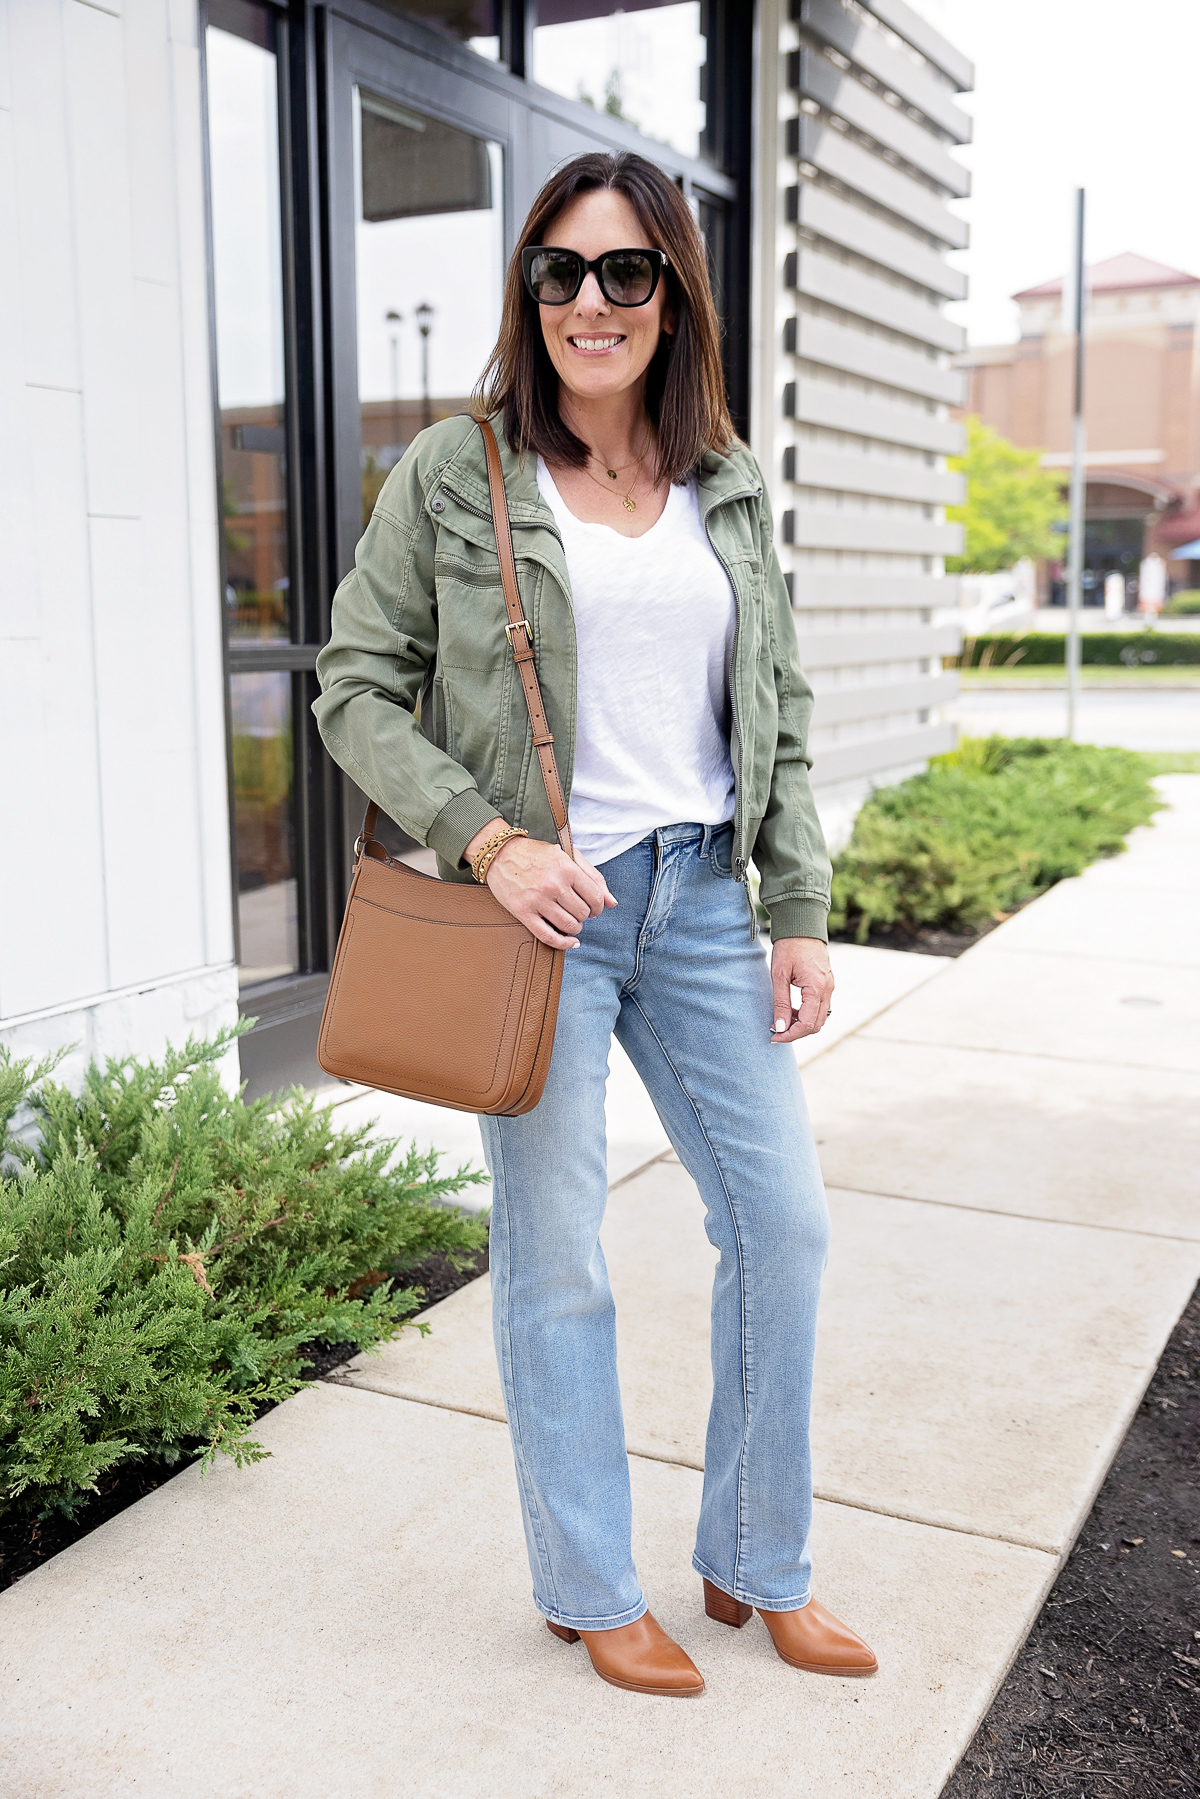 Fall Color Trends to Try: Army Green